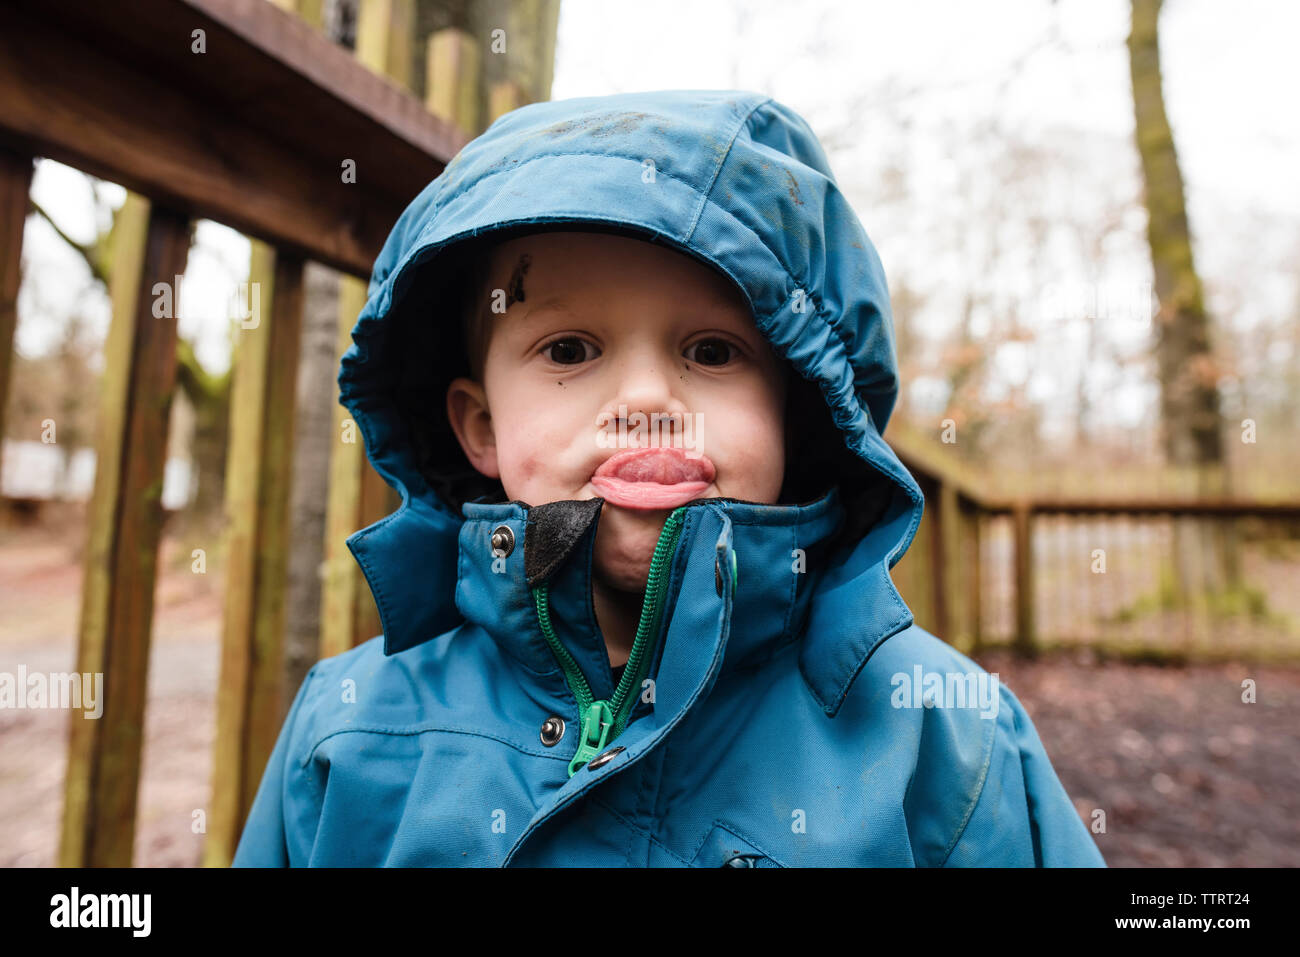 Portrait of boy sticking out tongue while standing at park Stock Photo